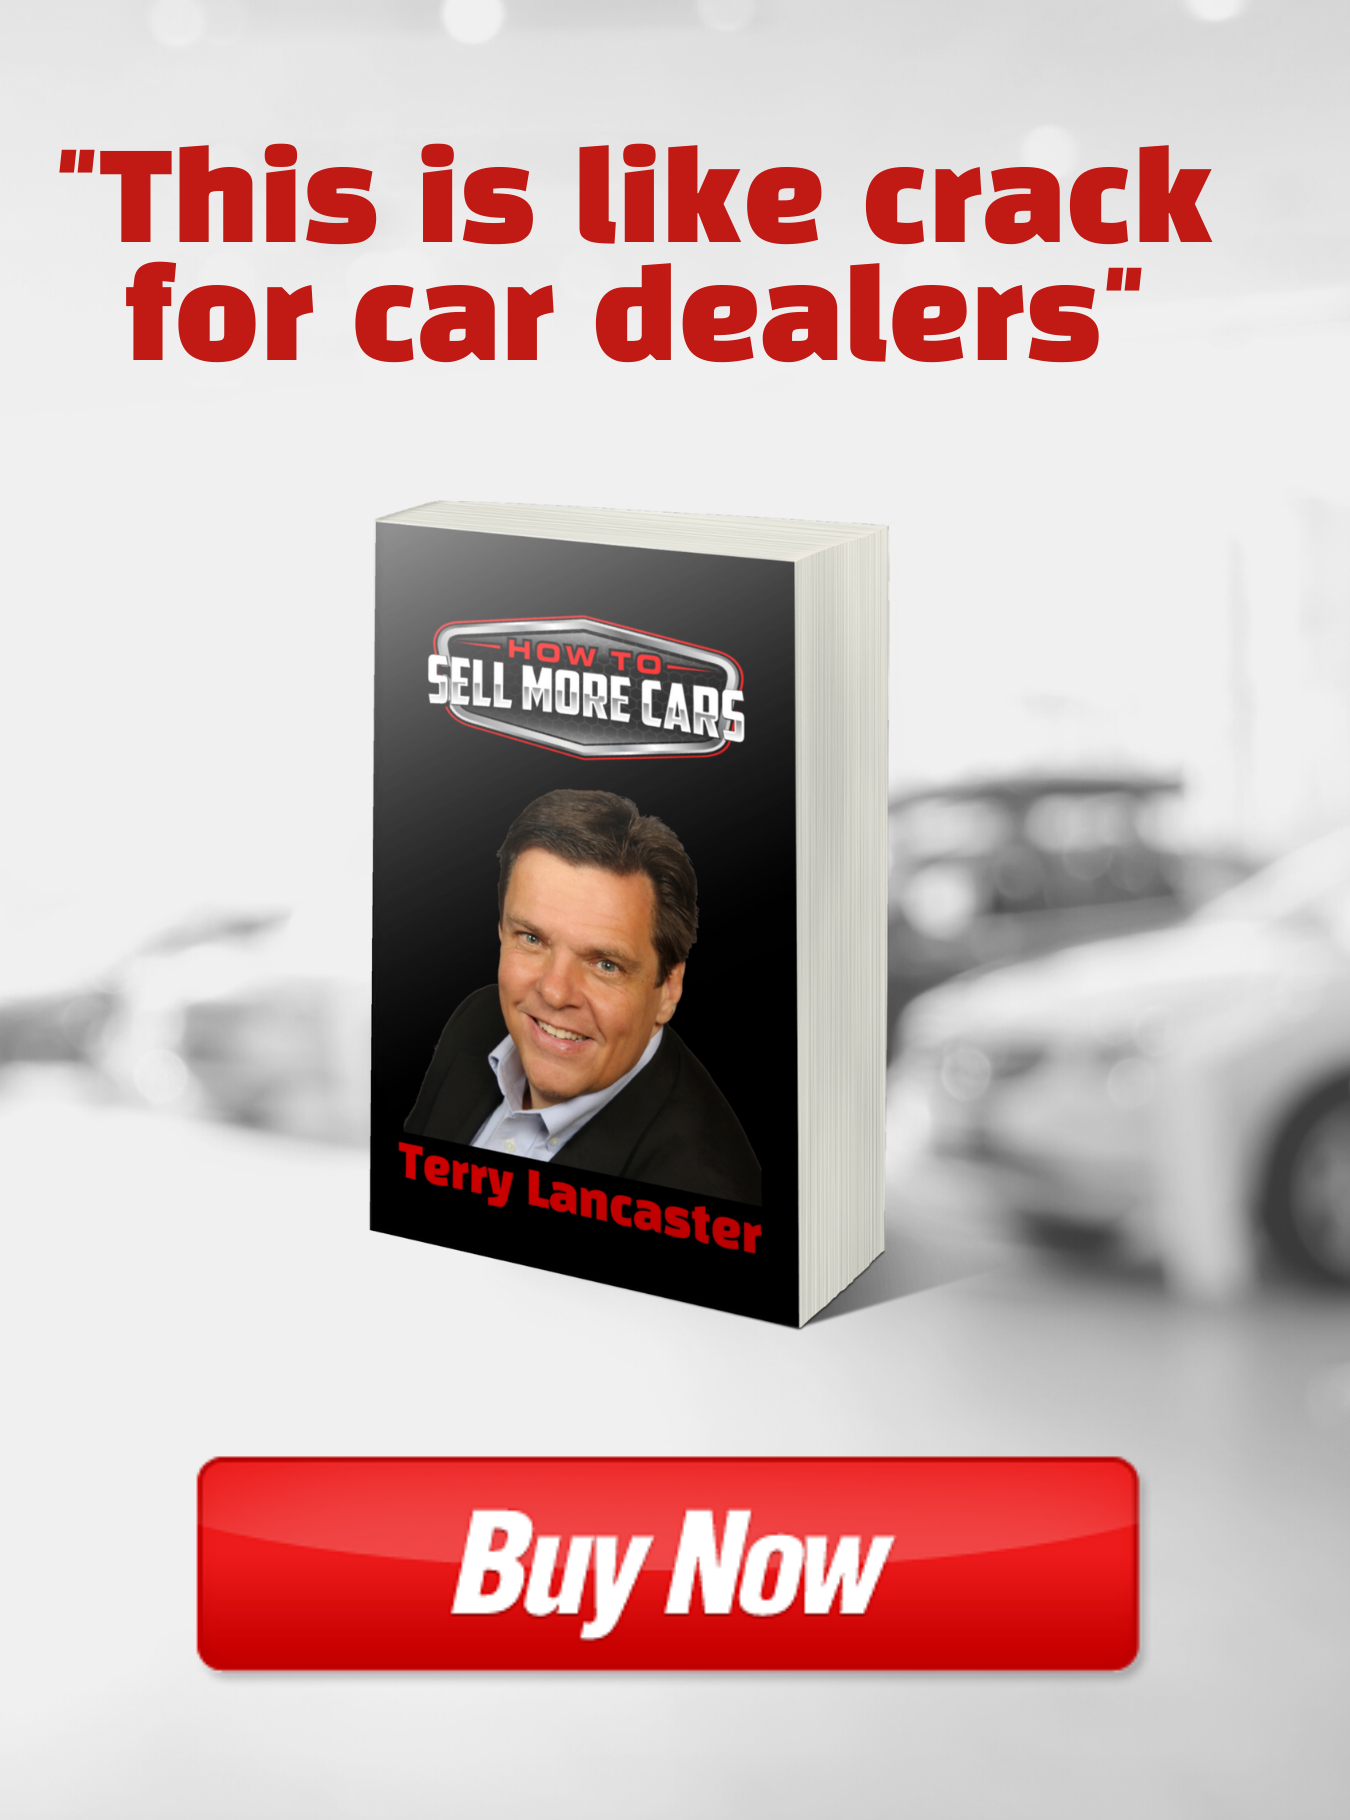 #1 selling book on customer follow-up